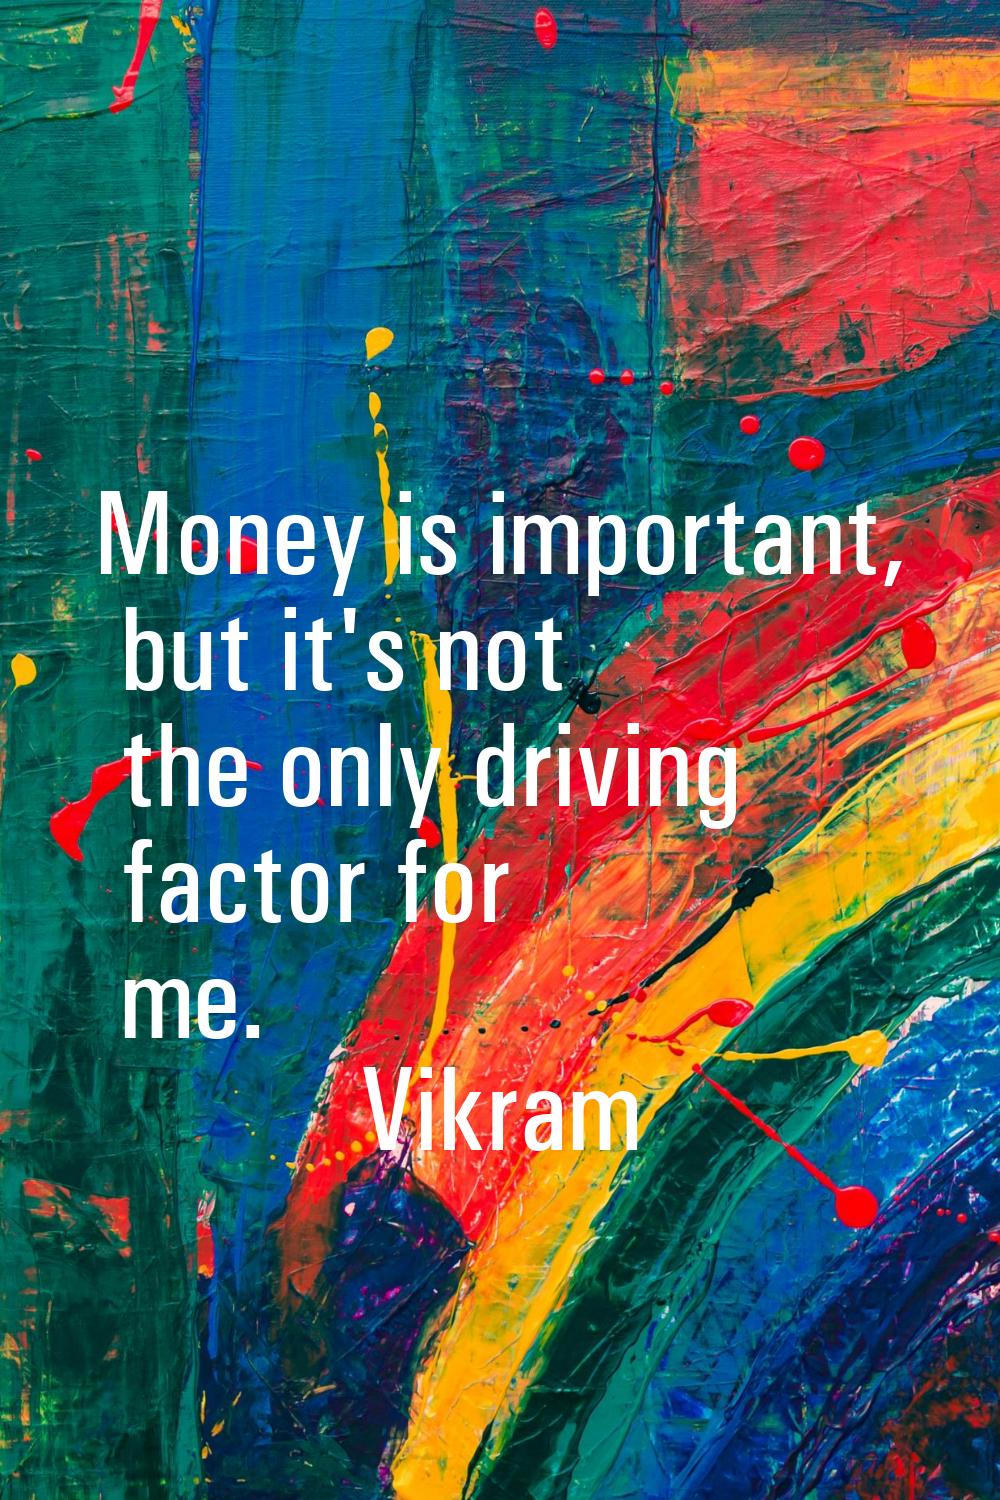 Money is important, but it's not the only driving factor for me.